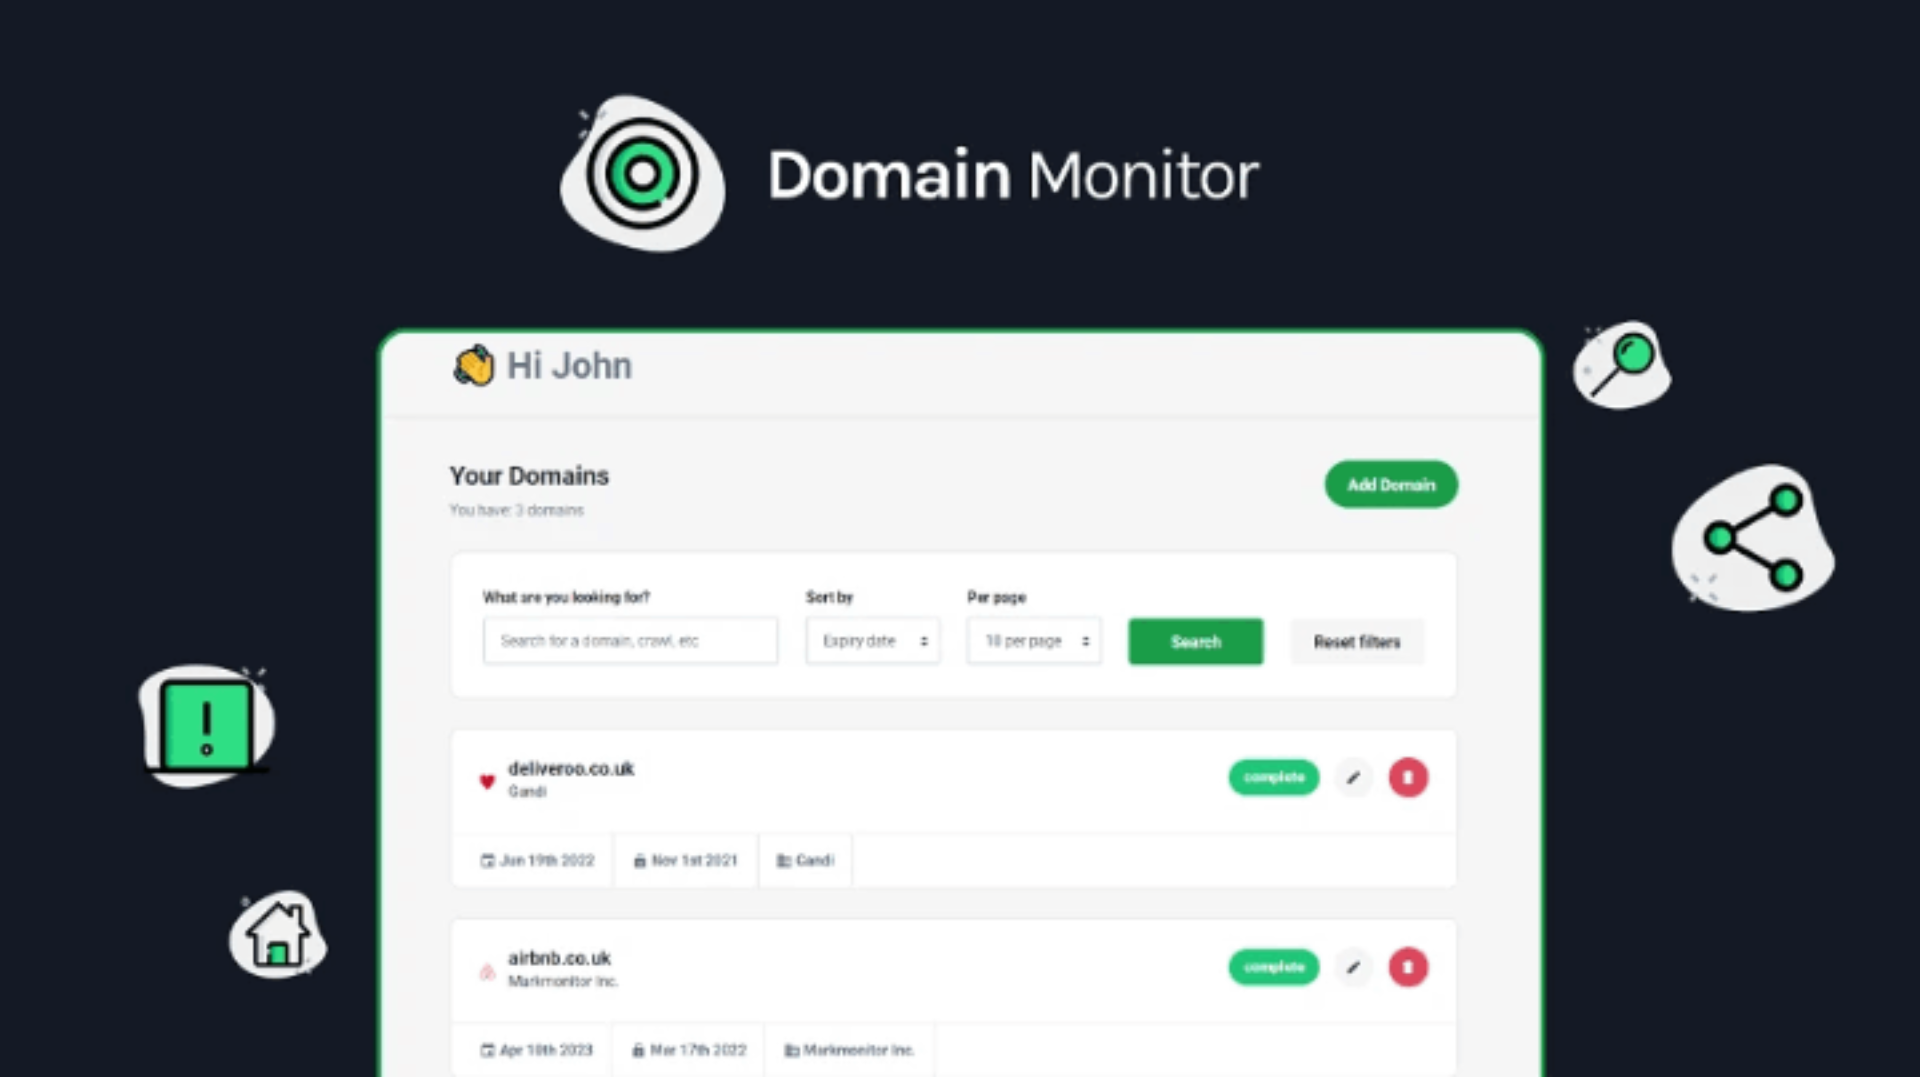 Lifetime Deal to Domain Monitor: Pro plan (100) for $49